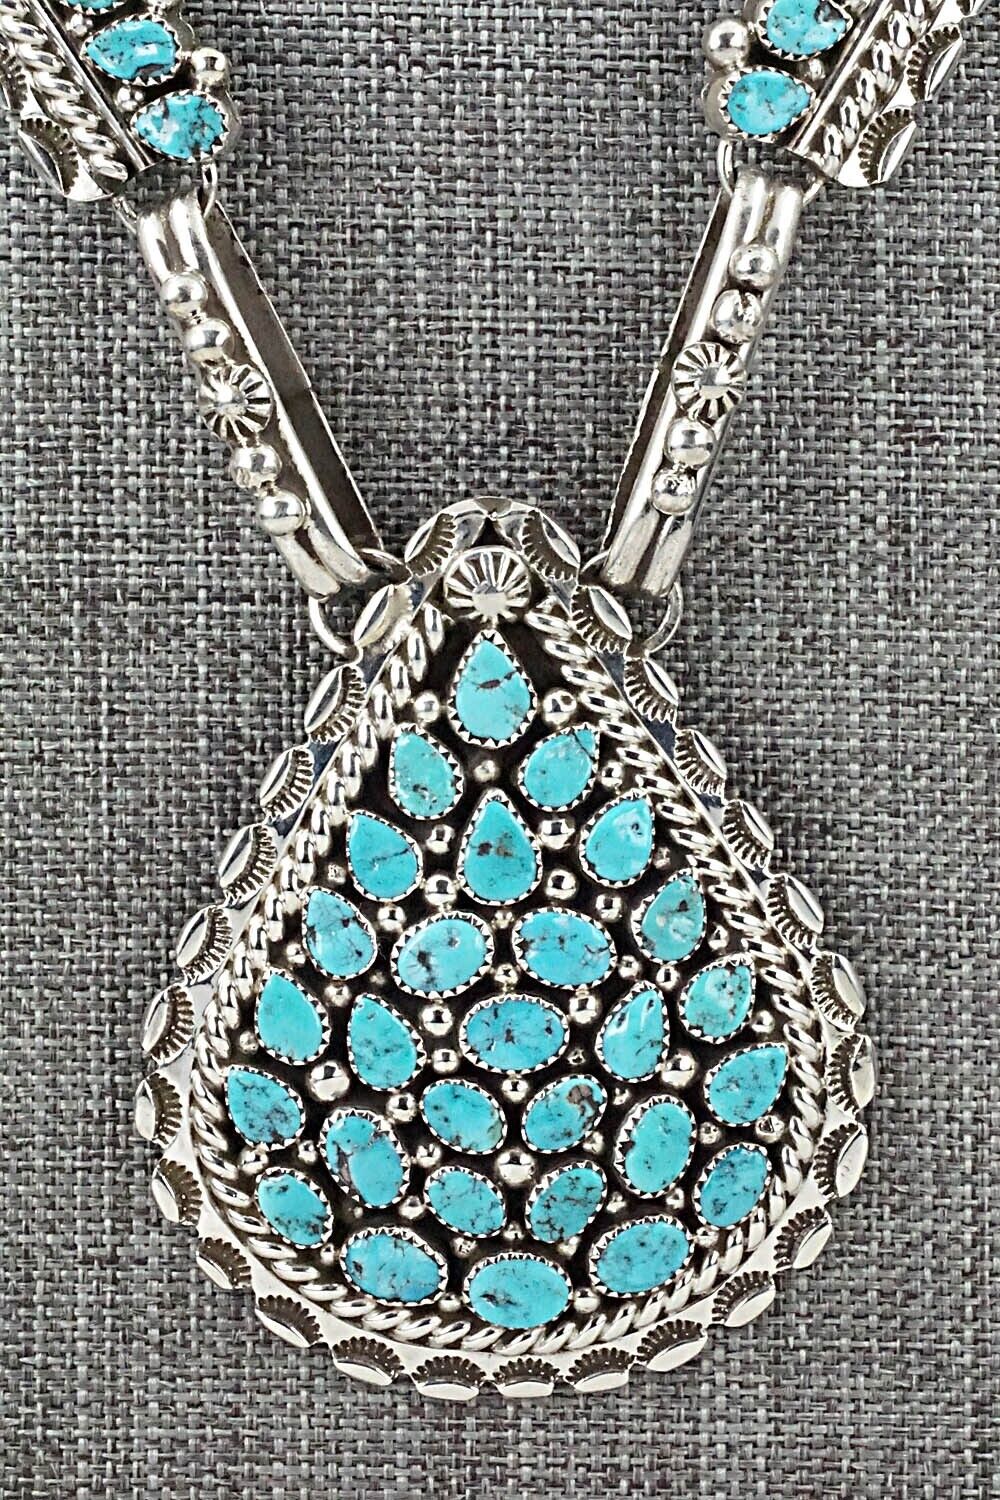 Turquoise & Sterling Silver Necklace and Earrings Set - Tina Jones